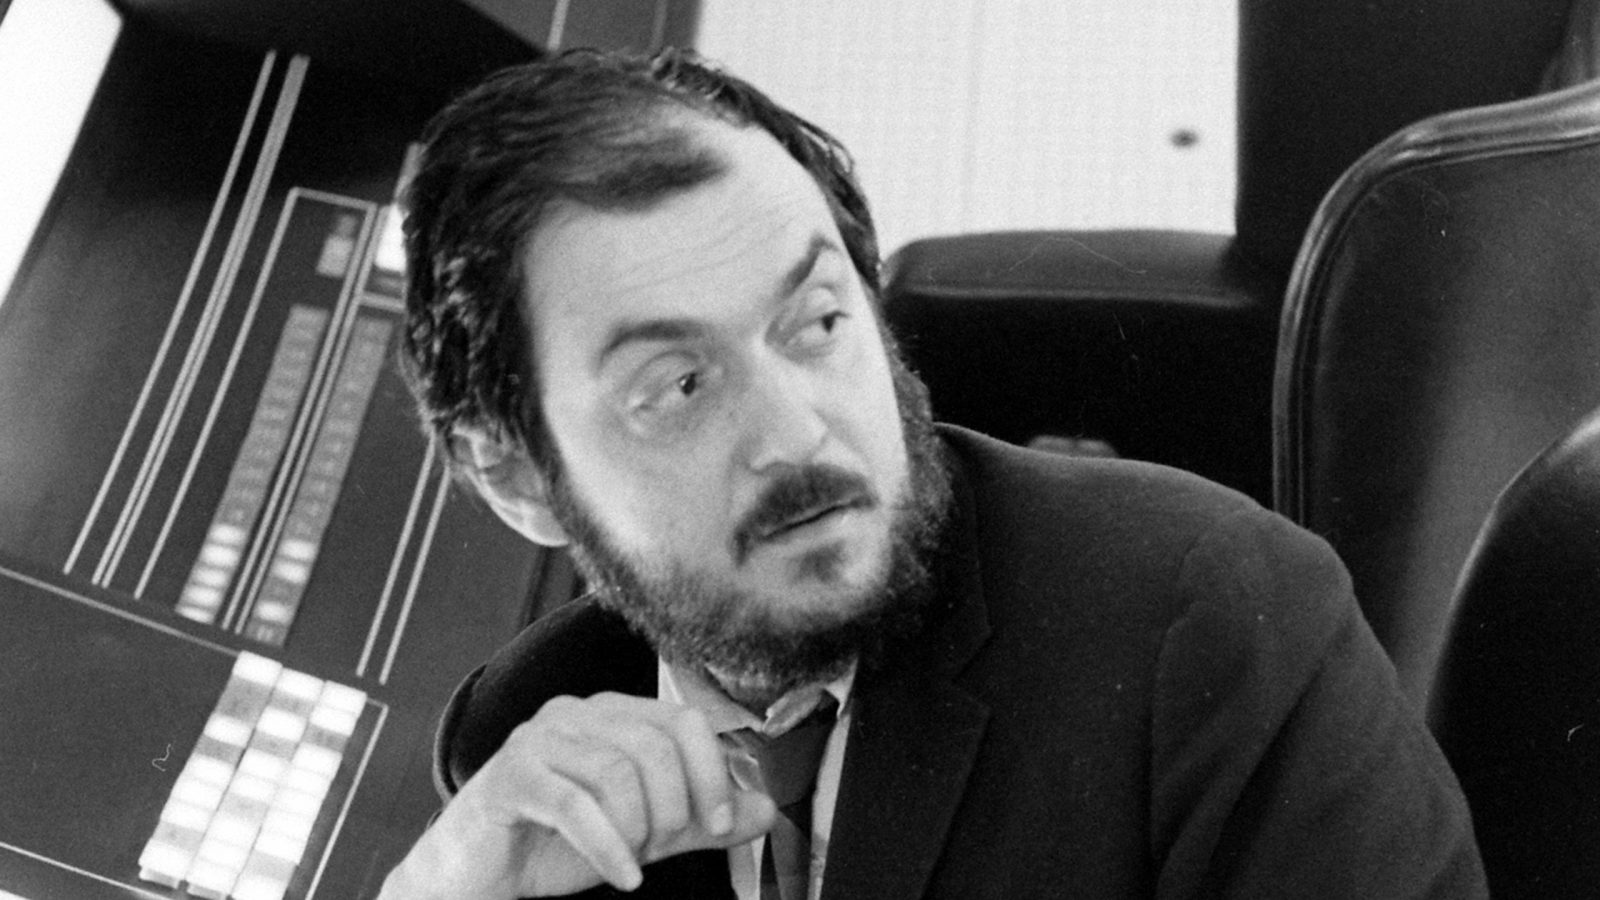 Passing This General Knowledge Quiz Means You Know a Lot About Everything Stanley Kubrick